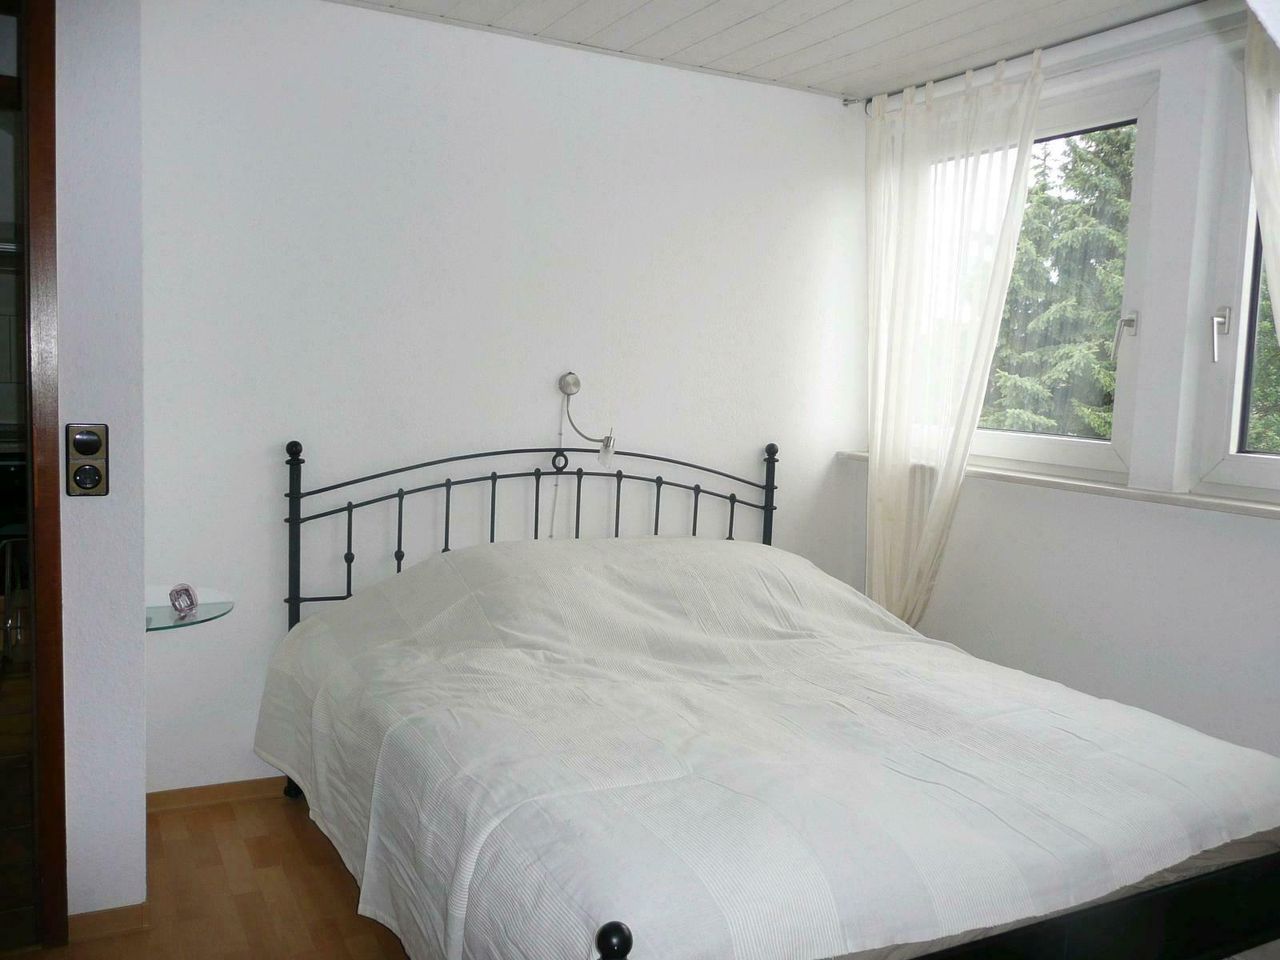 Fashionable 2-room attic apartment with balcony in Ratingen